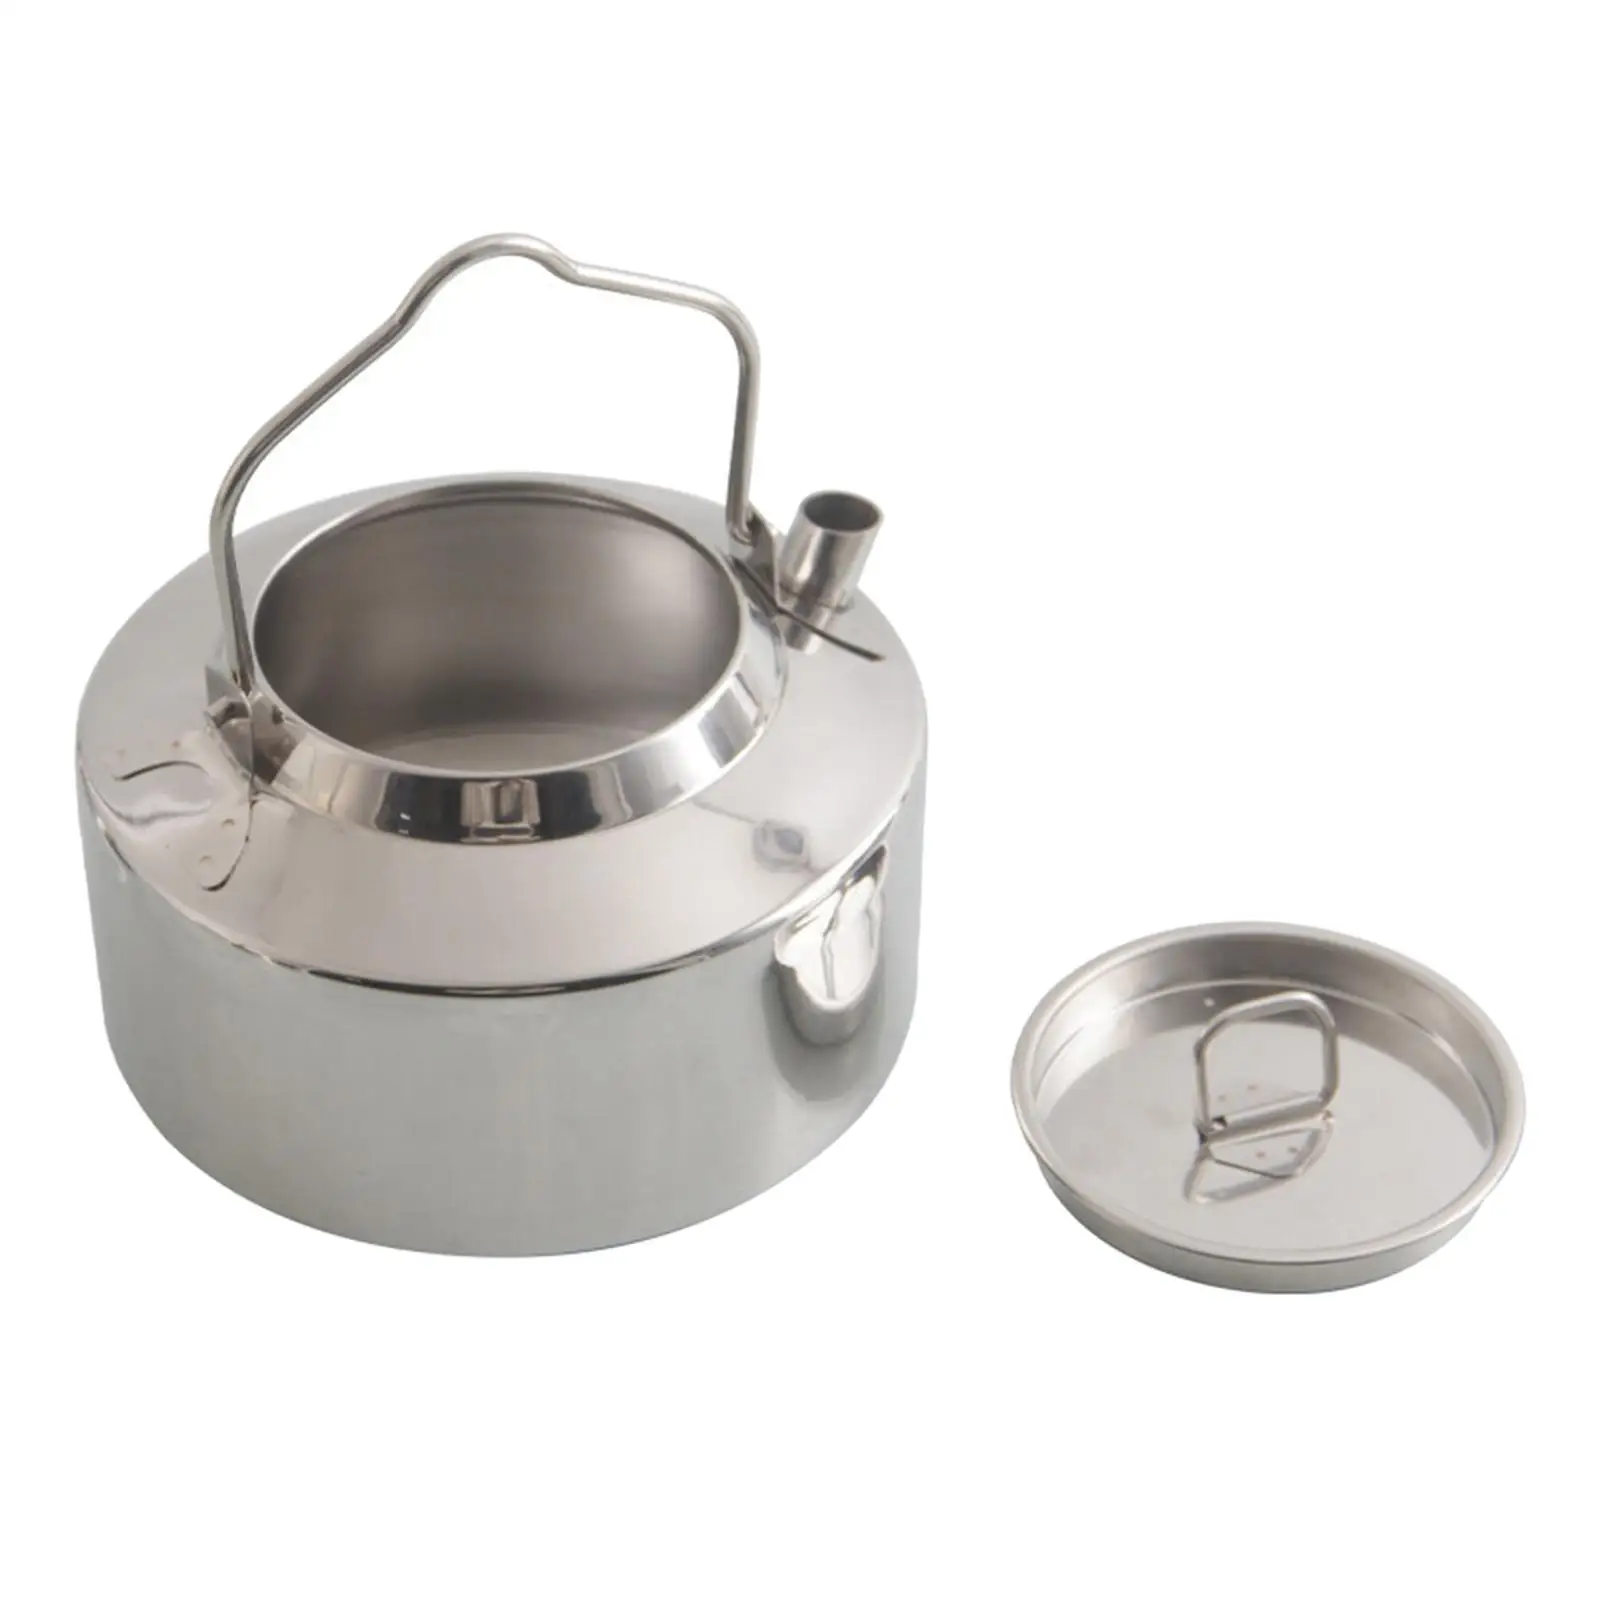 Outdoor Camping Kettle 1.3L Big Capacity Water Kettle Portable for